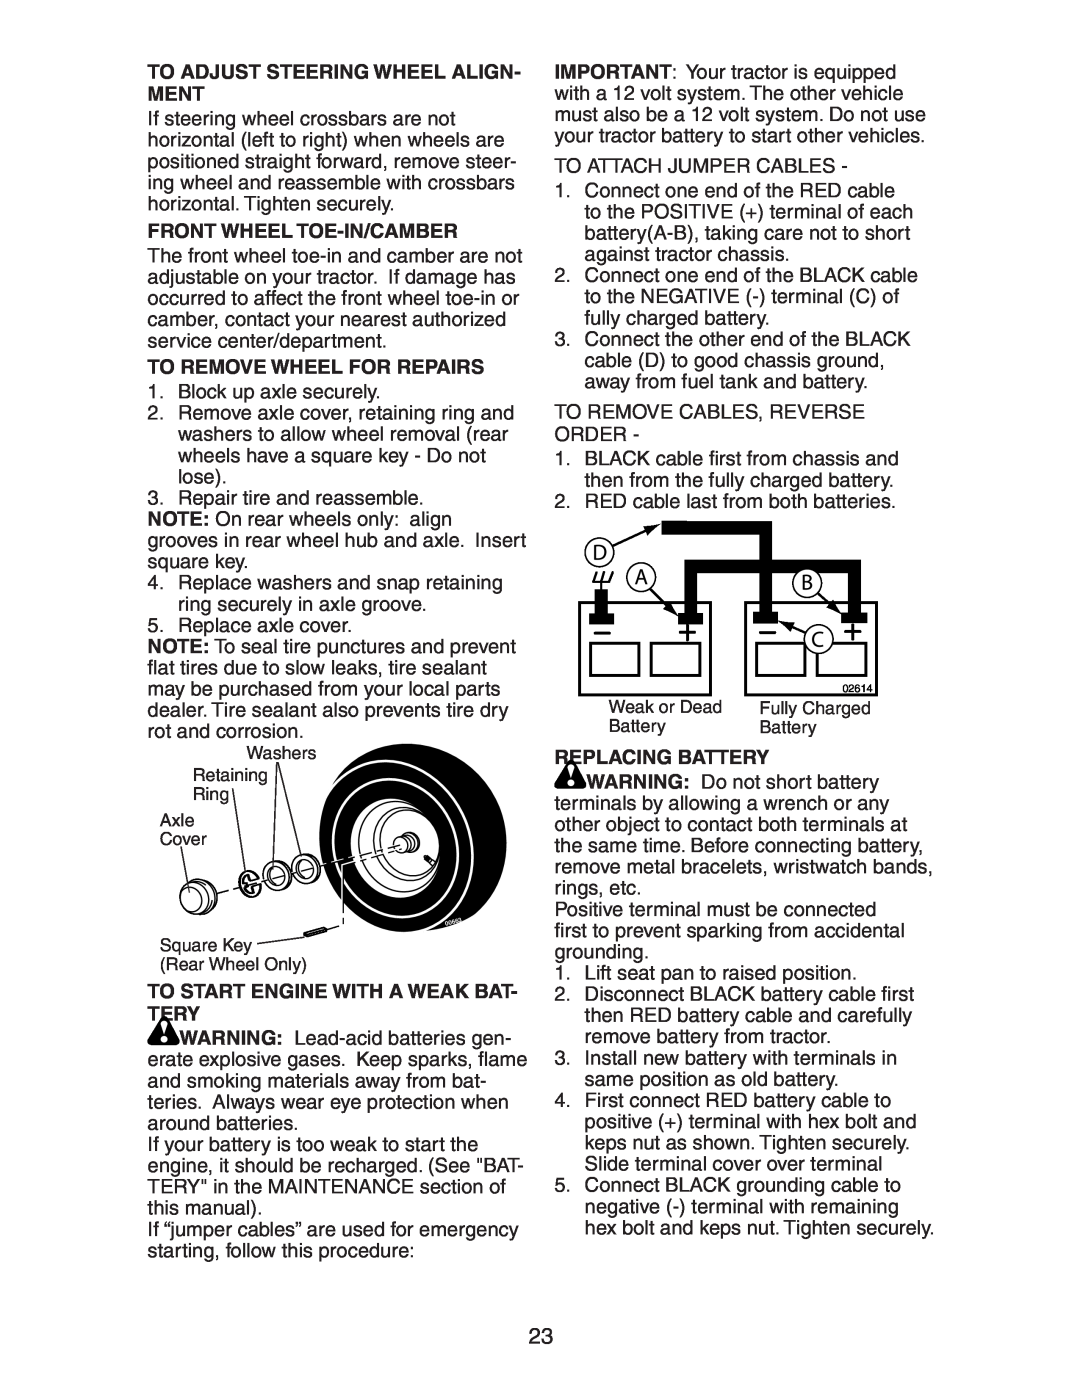 Poulan 271490 manual To Adjust Steering Wheel Align- Ment, Front Wheel Toe-In/Camber, To Remove Wheel For Repairs 